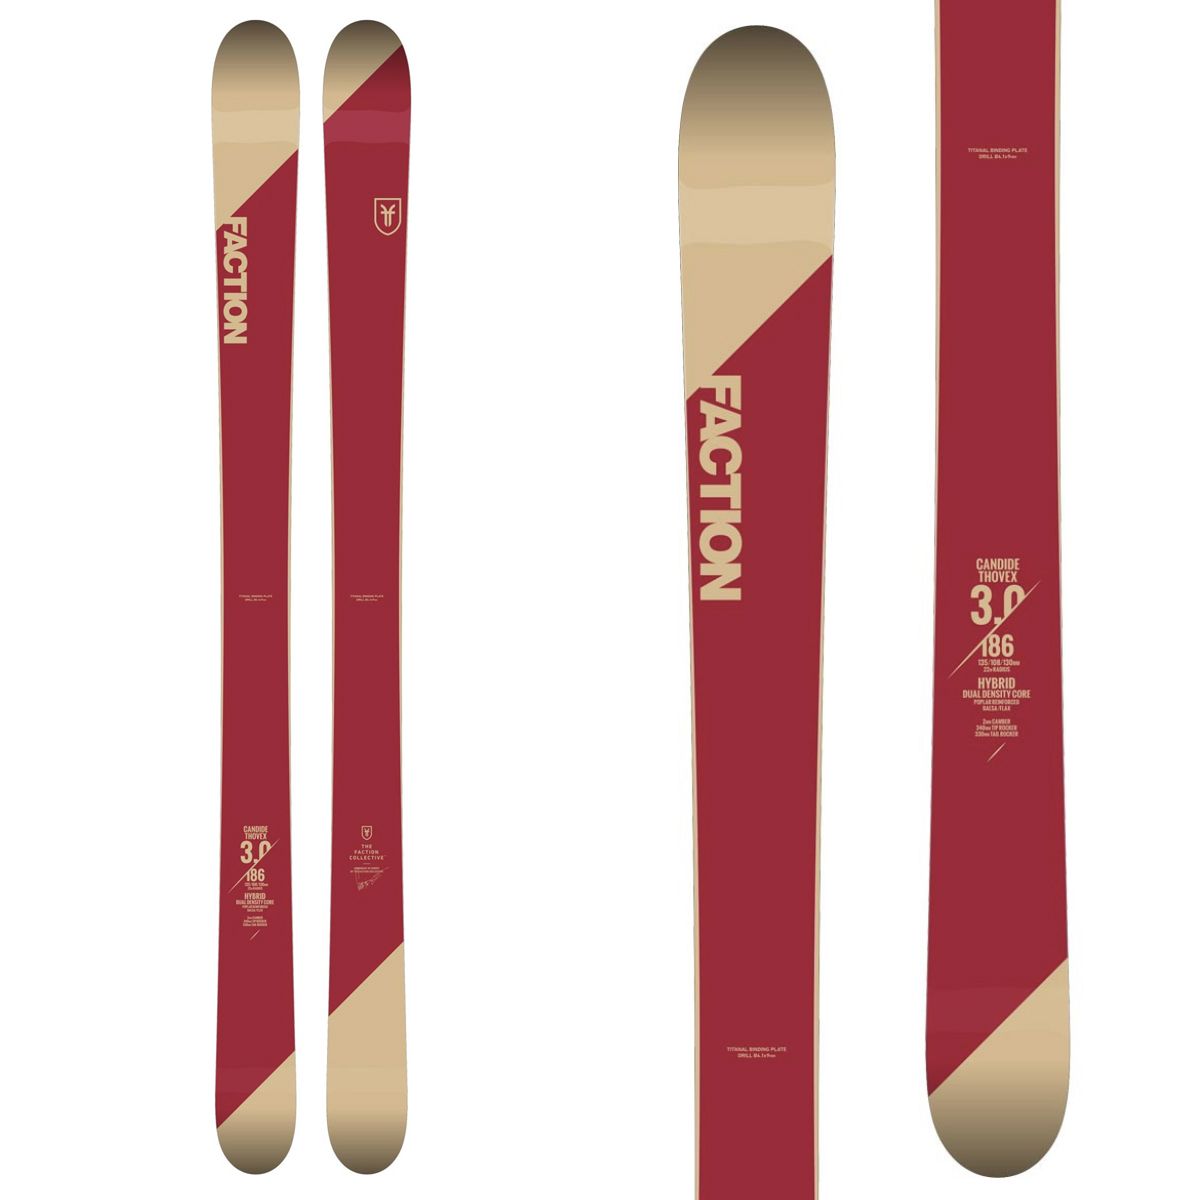 Pack Skis Candide 3.0 2019 + Fixations